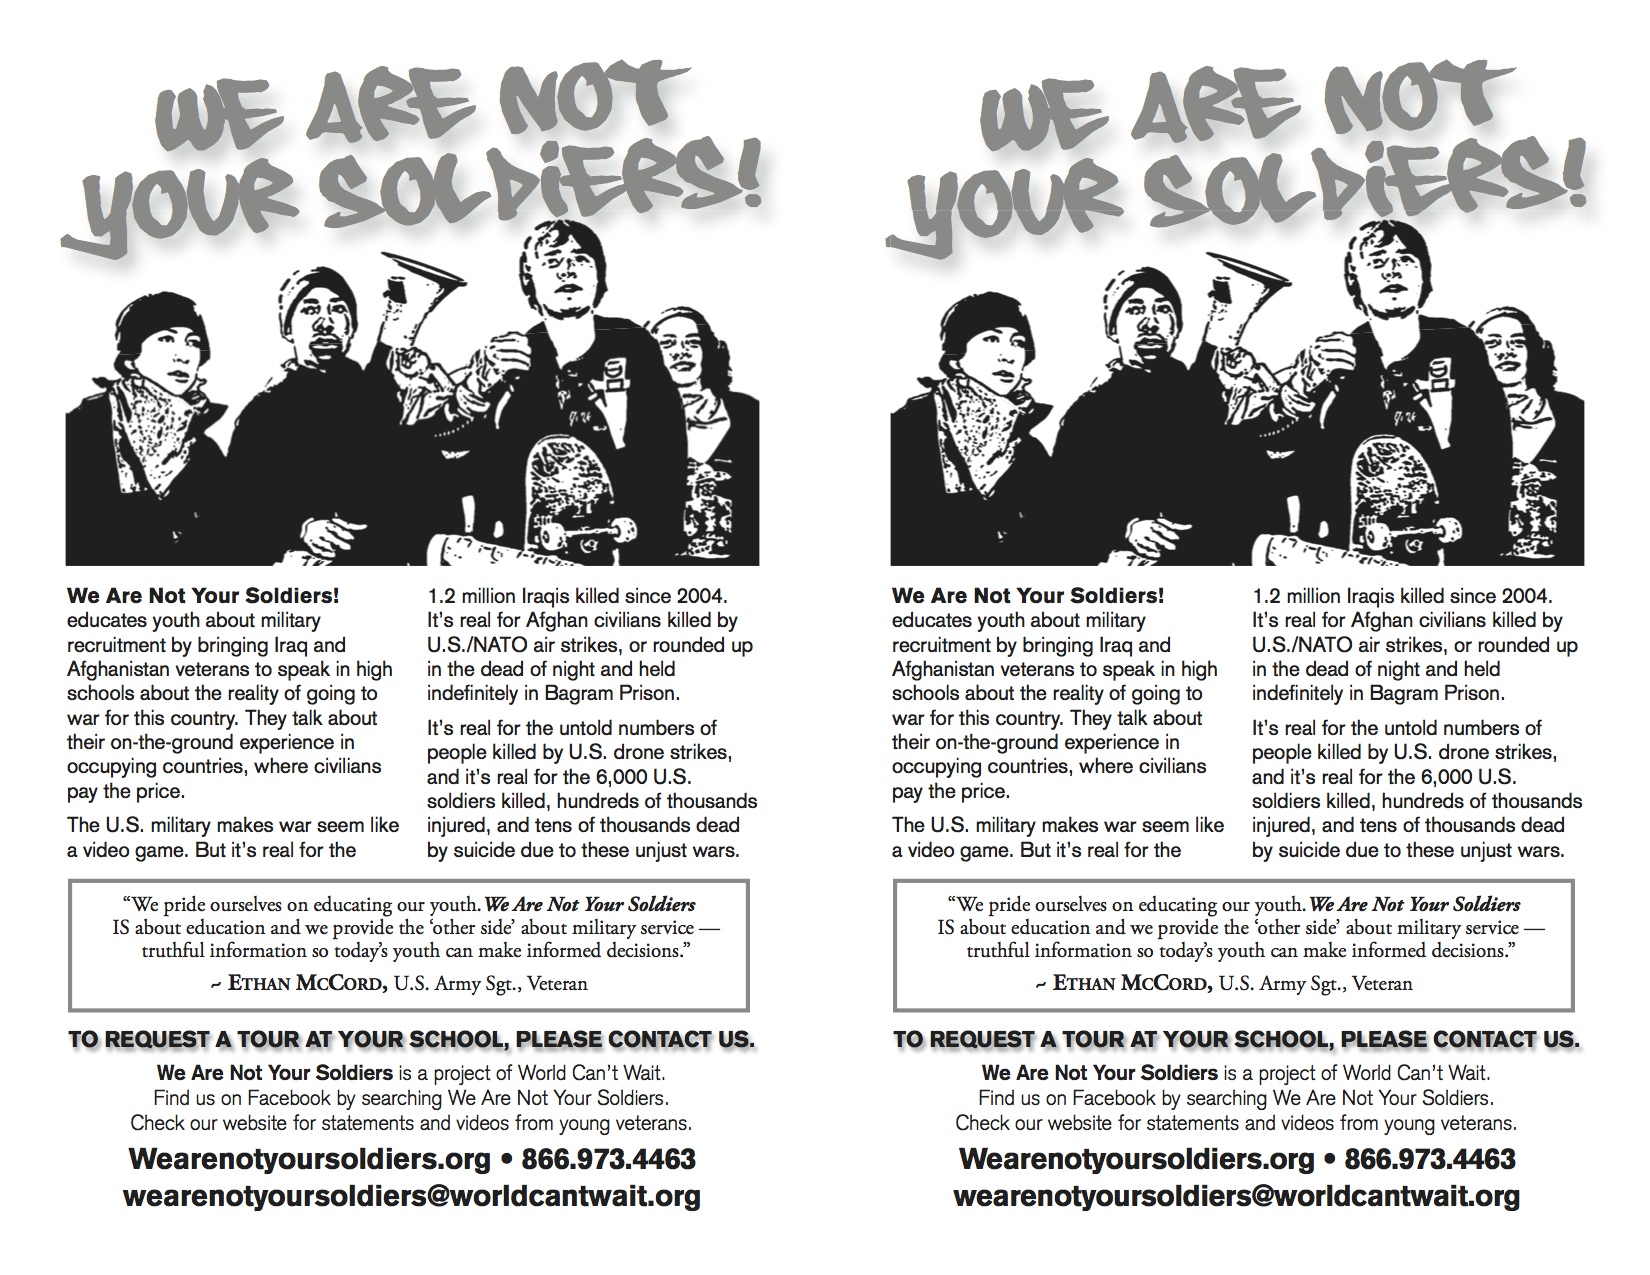 We are not your soldiers flier